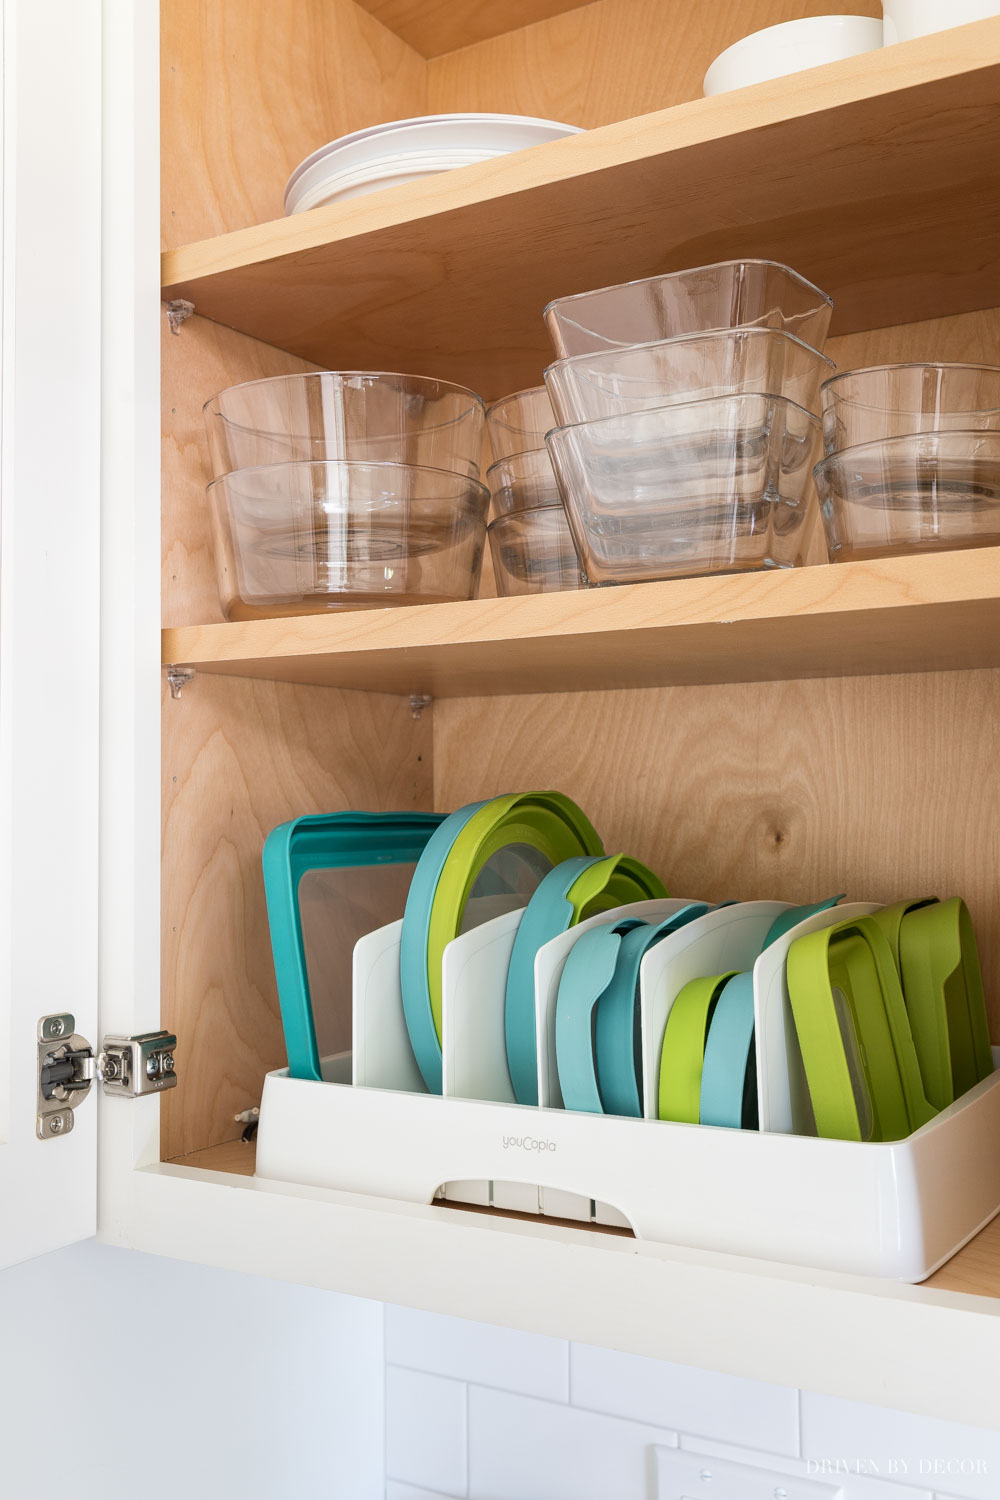 This lid organizer helps organize your kitchen (especially your food storage containers!) on a budget!